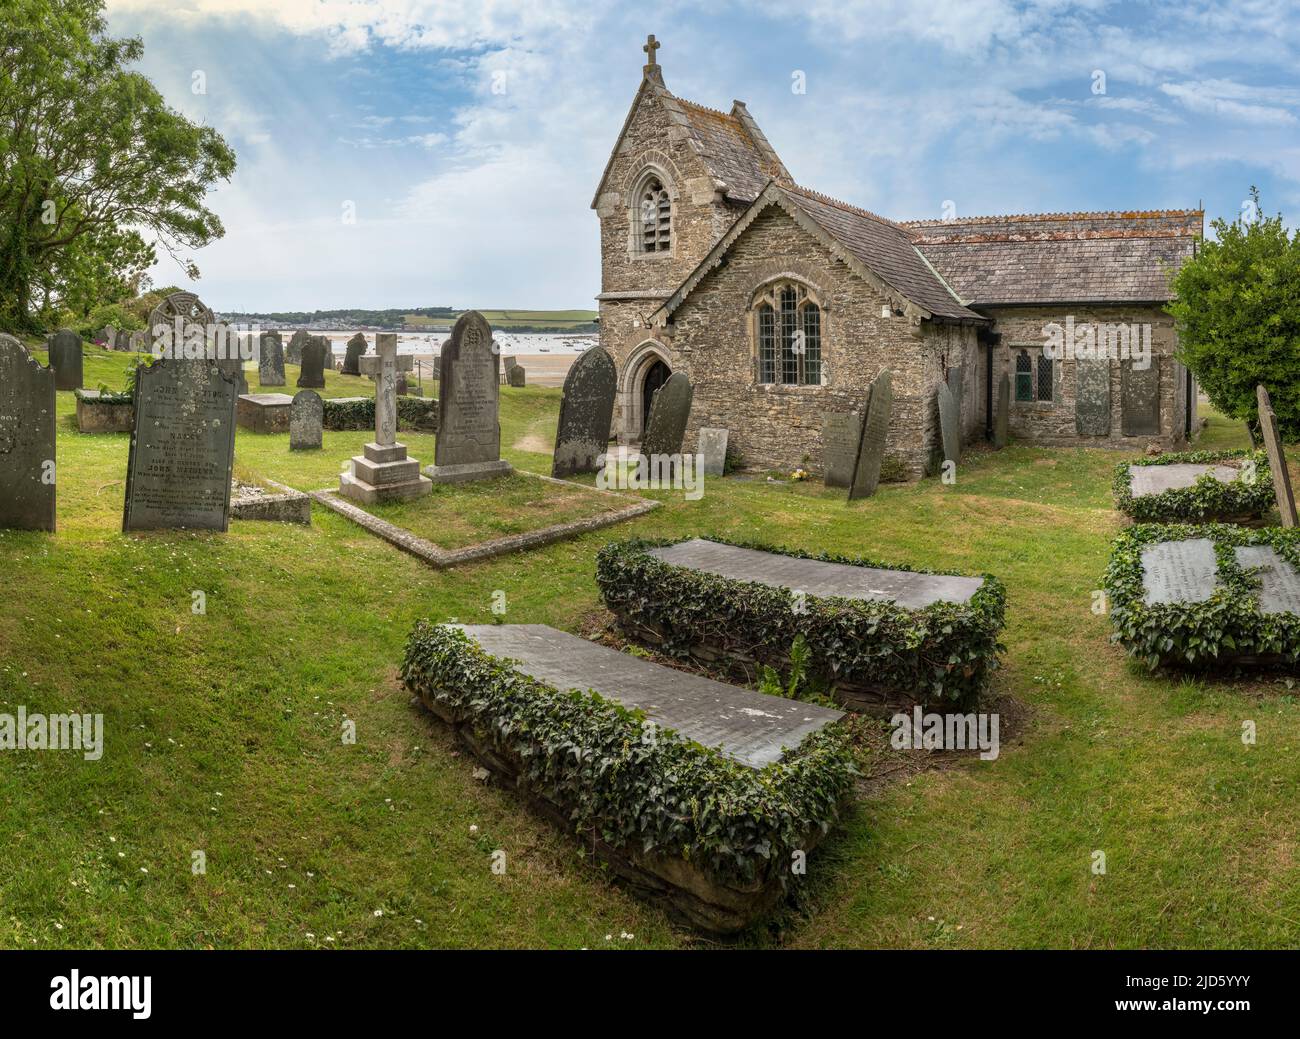 The ancient Norman chapel of St. Michael's in Porthilly, situated on the Camel estuary opposite Padstow, is one of two churches in the parish of St. M Stock Photo